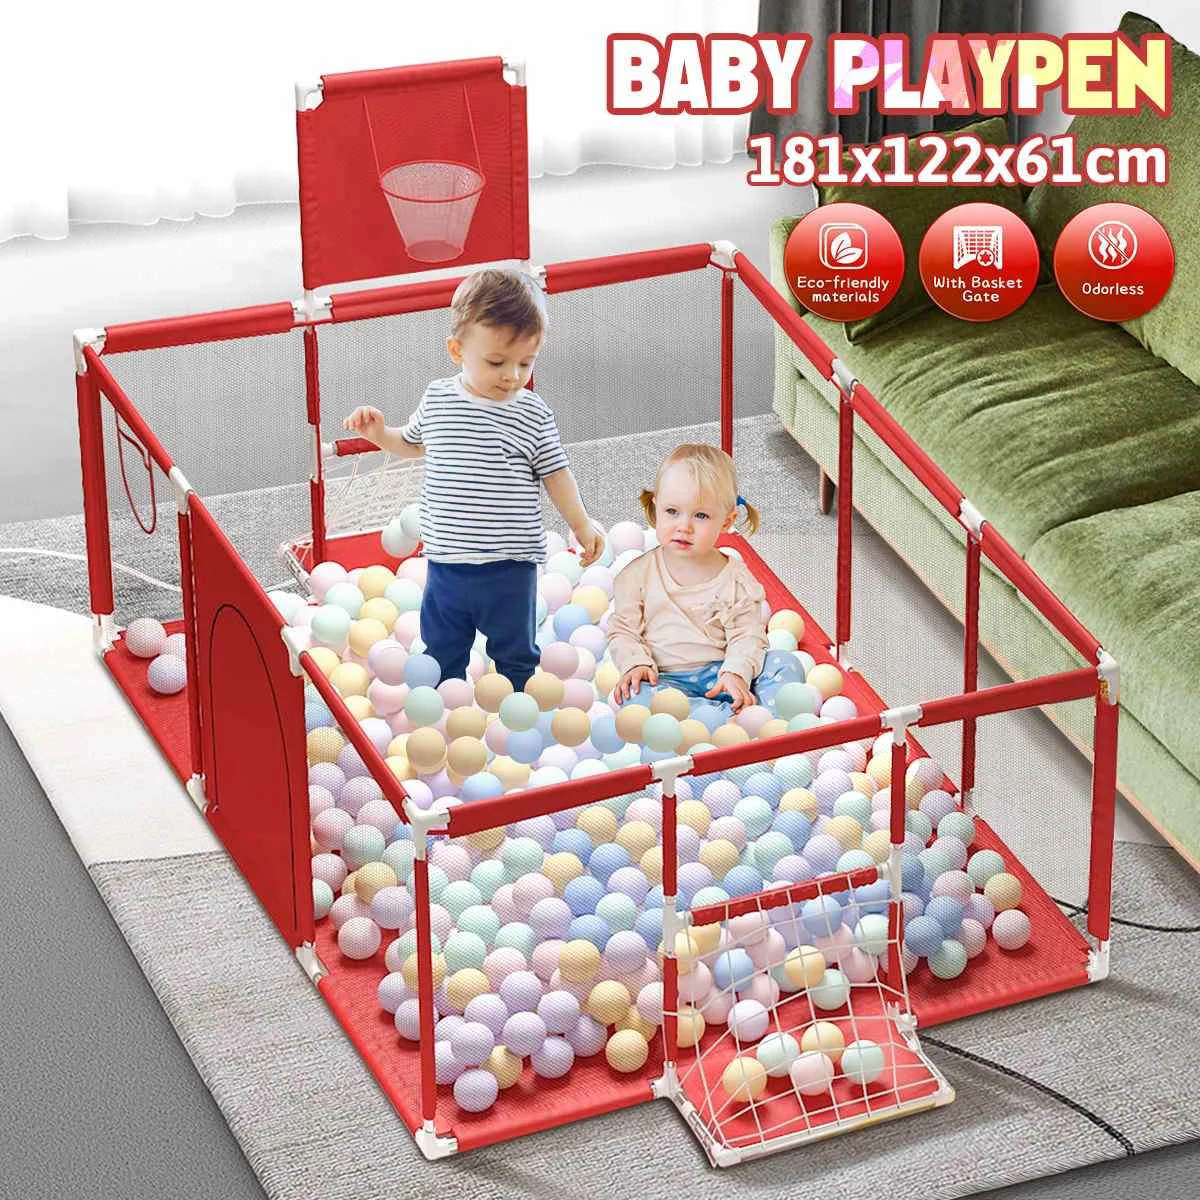 

Bioby Baby Playpen Kids Playground Furniture Baby Bed Barriers Safety Folding Baby Park Baby Crib Ball Home Dry Pool Accessories